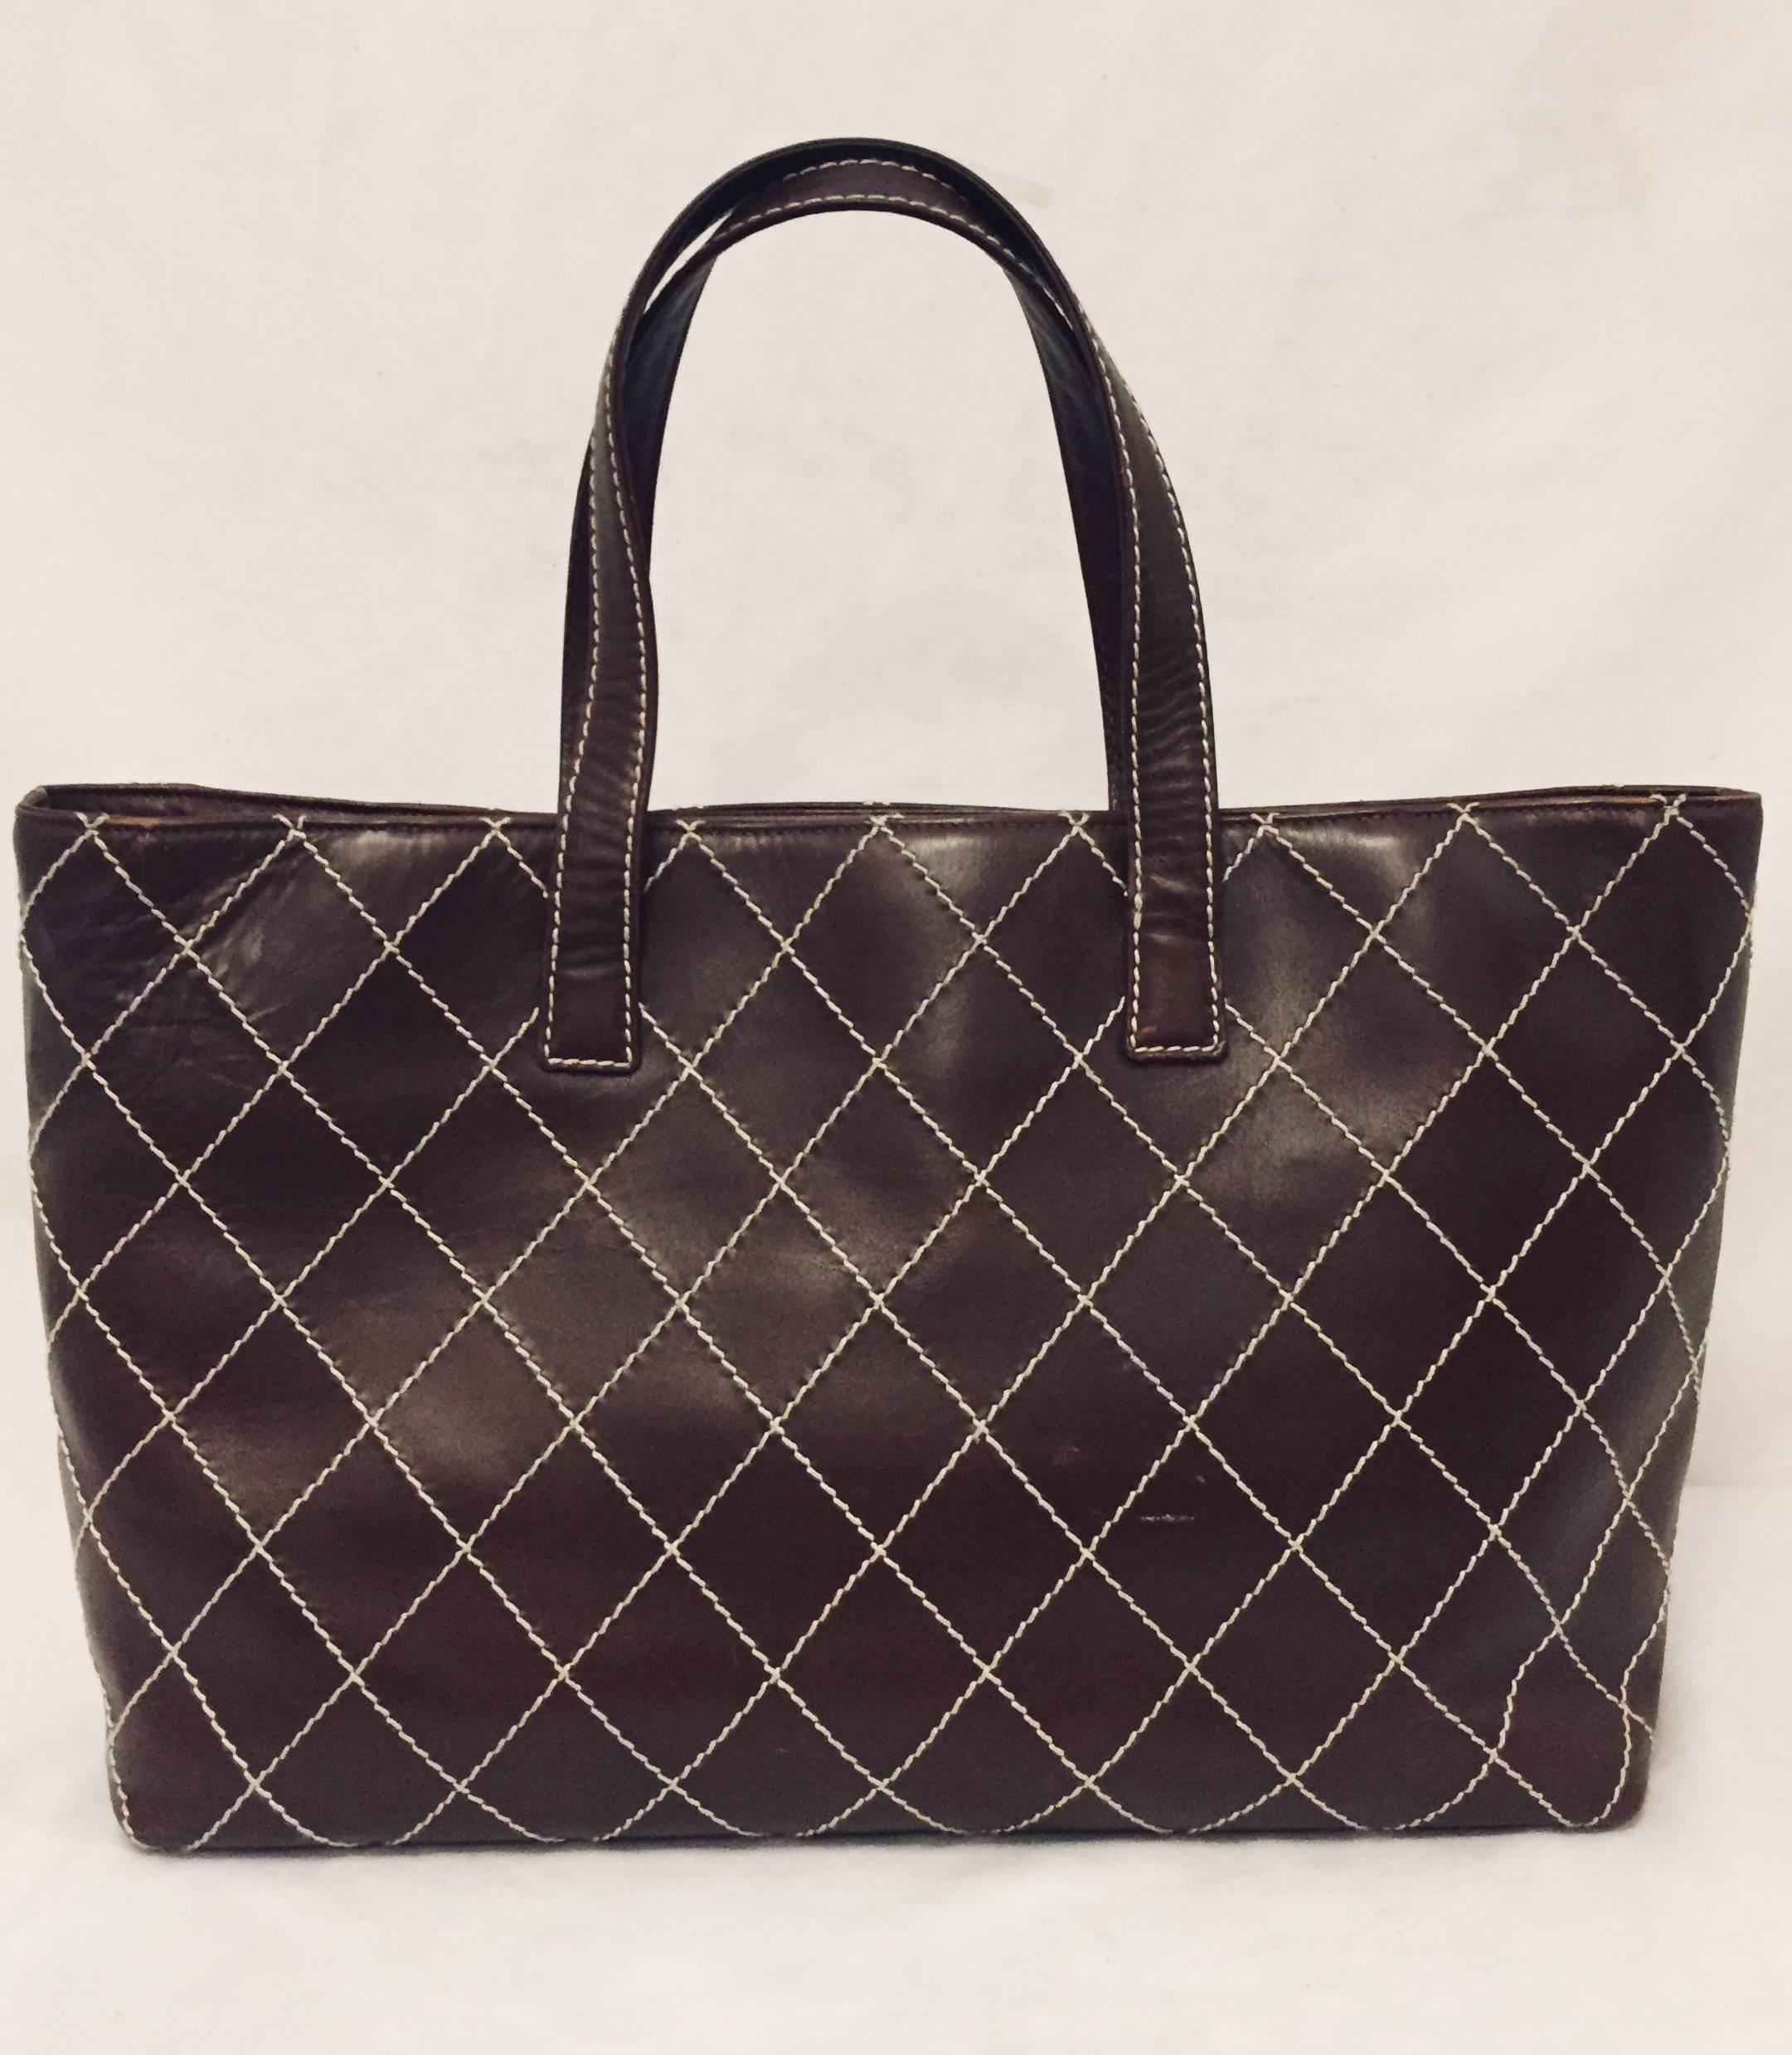 This Chanel brown lambskin leather in quilted diamond pattern and contrasting beige stitch detail is a perfect bag for every day,  going shopping or  for a quick overnight stay for your necessities.  The inside has one large pocket with a side slit